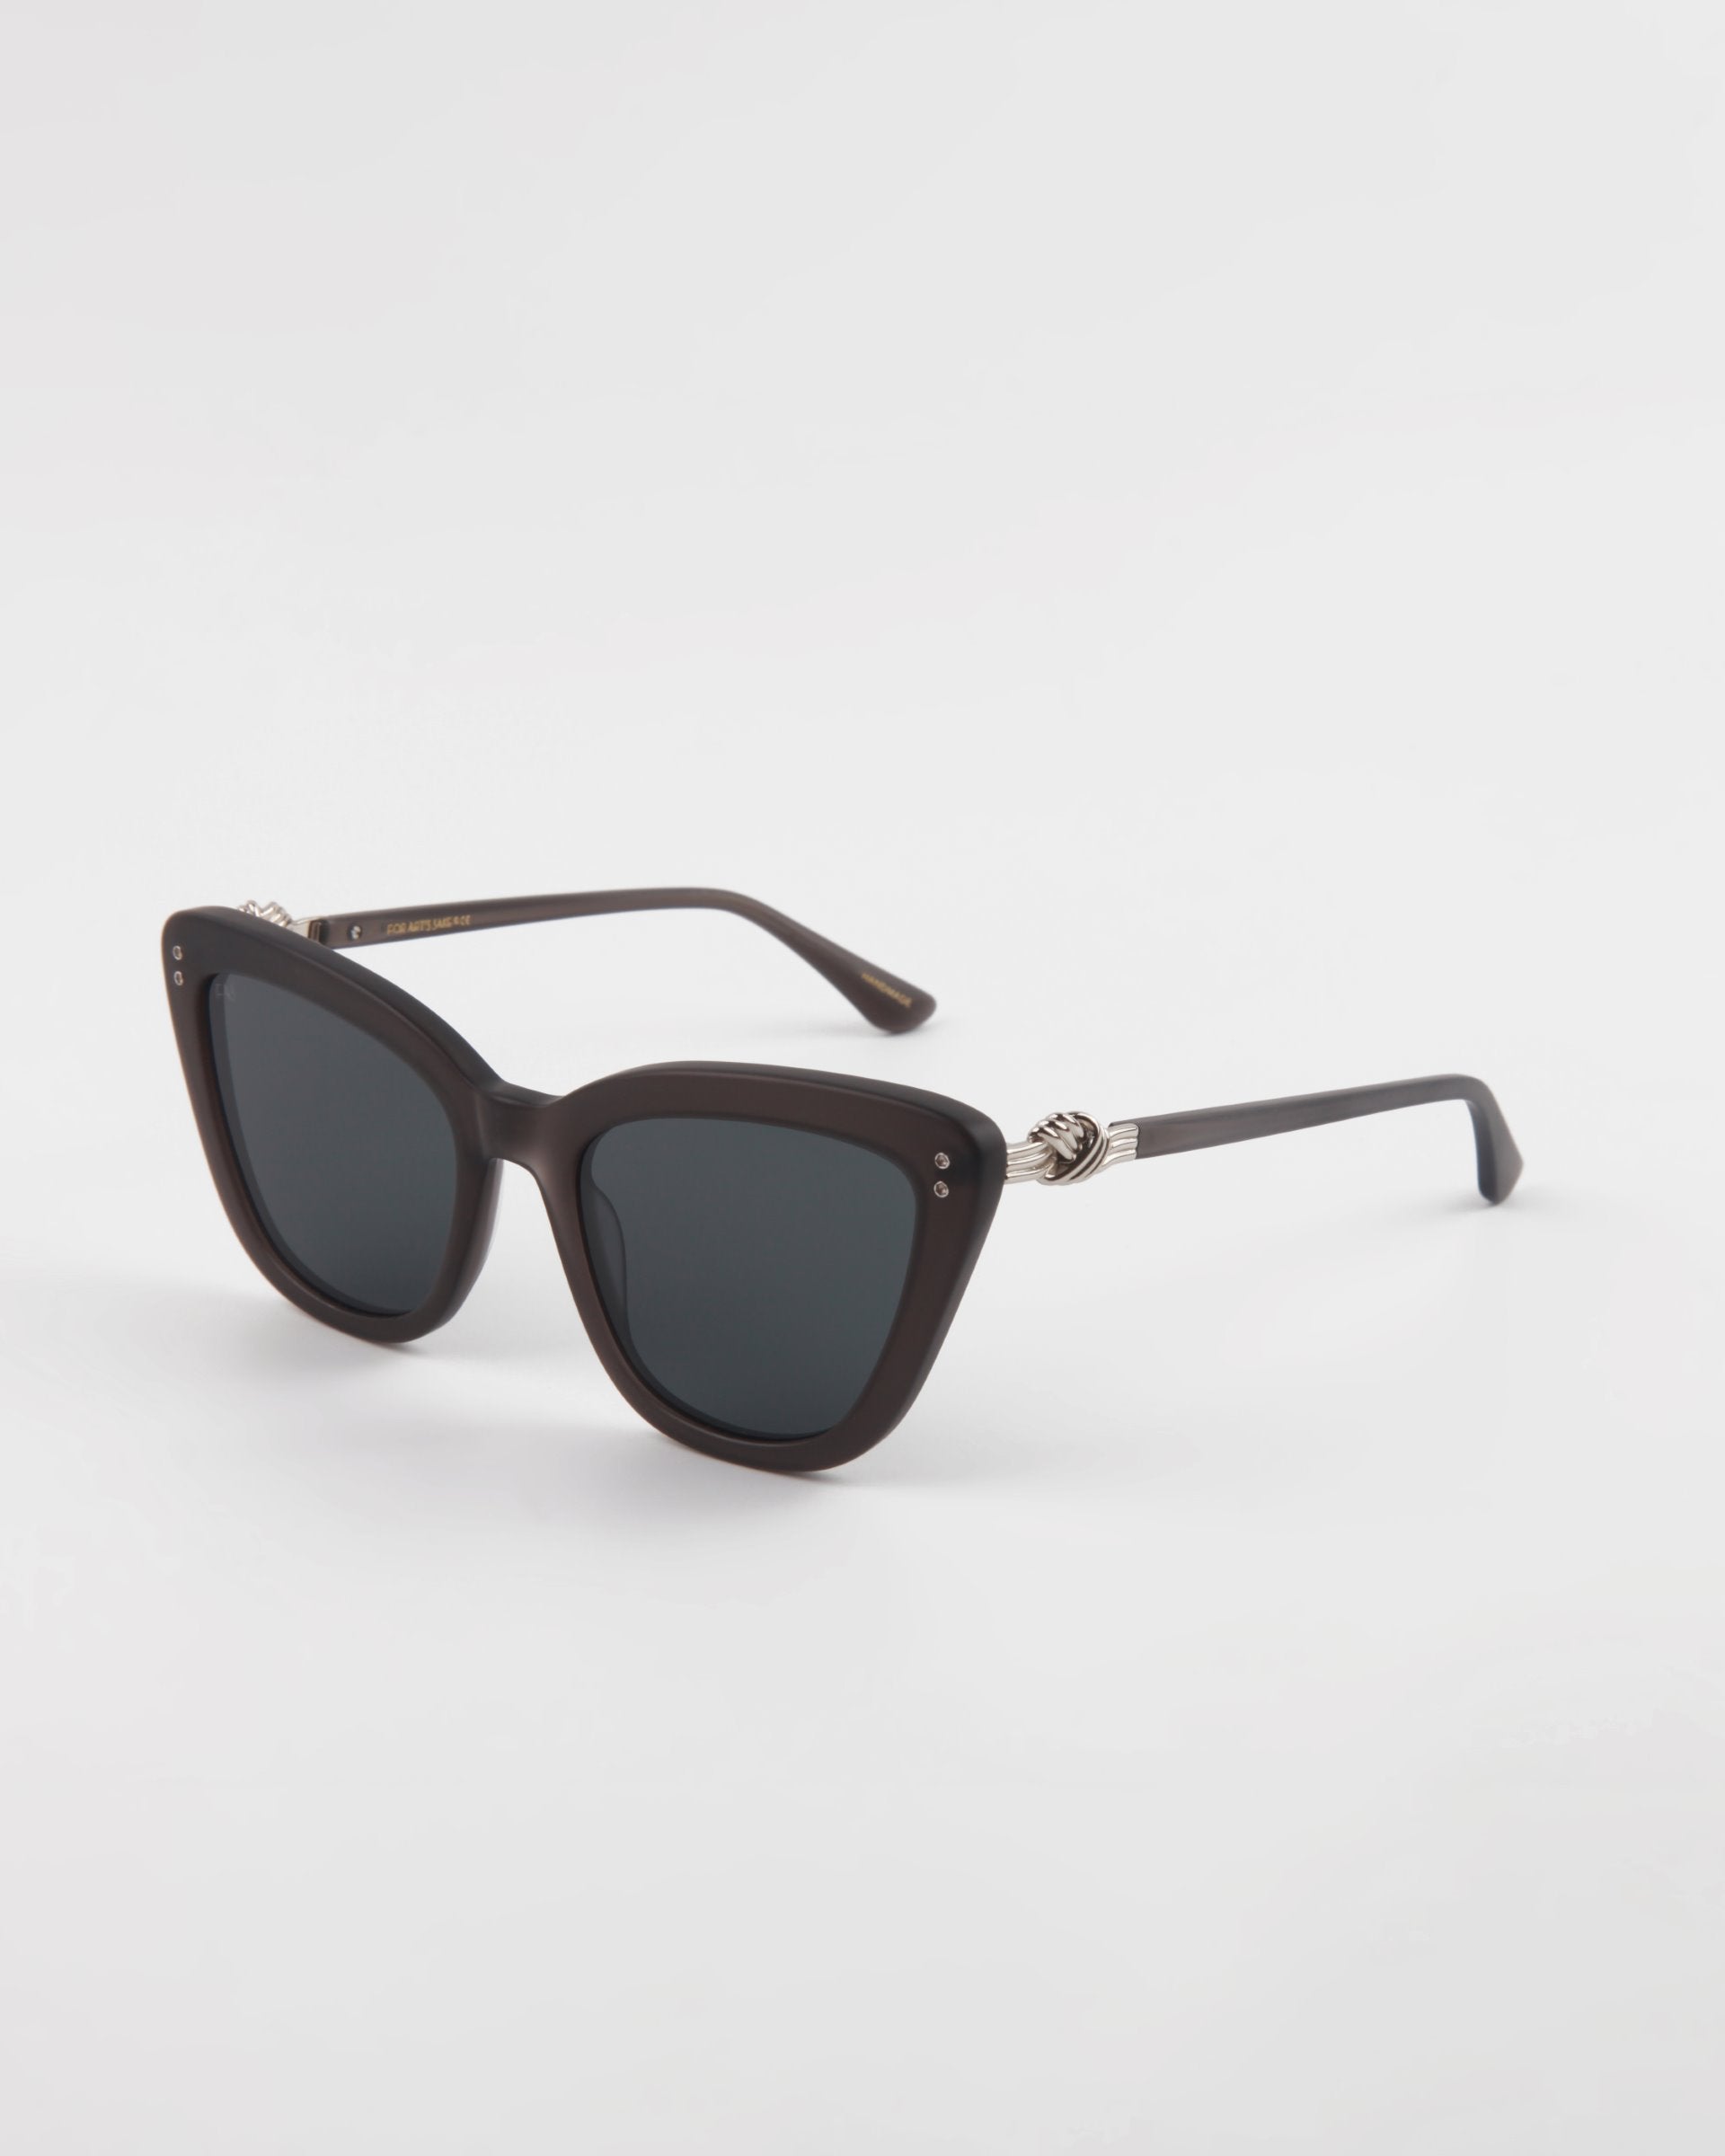 A pair of stylish black cat-eye Ice Cream frames with dark tinted lenses. These handmade acetate sunglasses by For Art&#39;s Sake® feature a slightly thick frame, small metallic accents on the temples, and provide complete UVA &amp; UVB protection. The background is plain white.